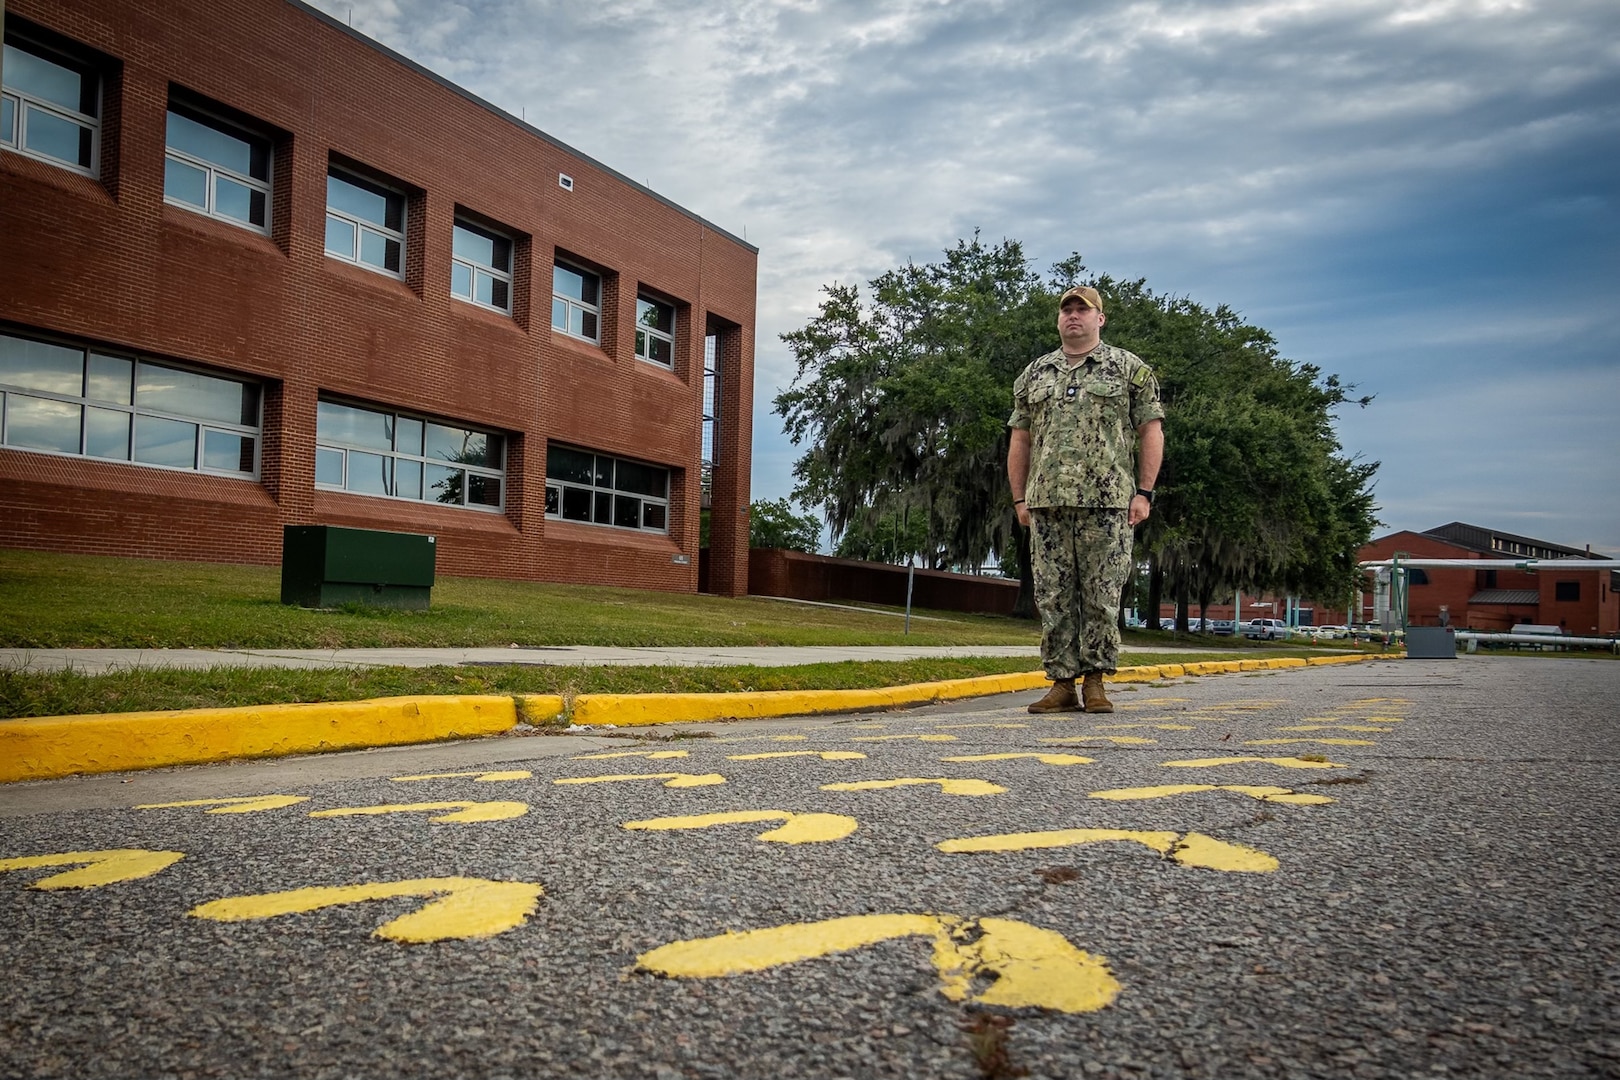 Navy Cmdr. Richard Yates, USMEPCOM 10th BN commander, stands on the same yellow footprints he stood on at his own reception during a Leaders Professional Development event. The Leaders Professional Development event was held 10 - 13 Oct. at Marine Corps Recruit Depot, Parris Island, South Carolina.